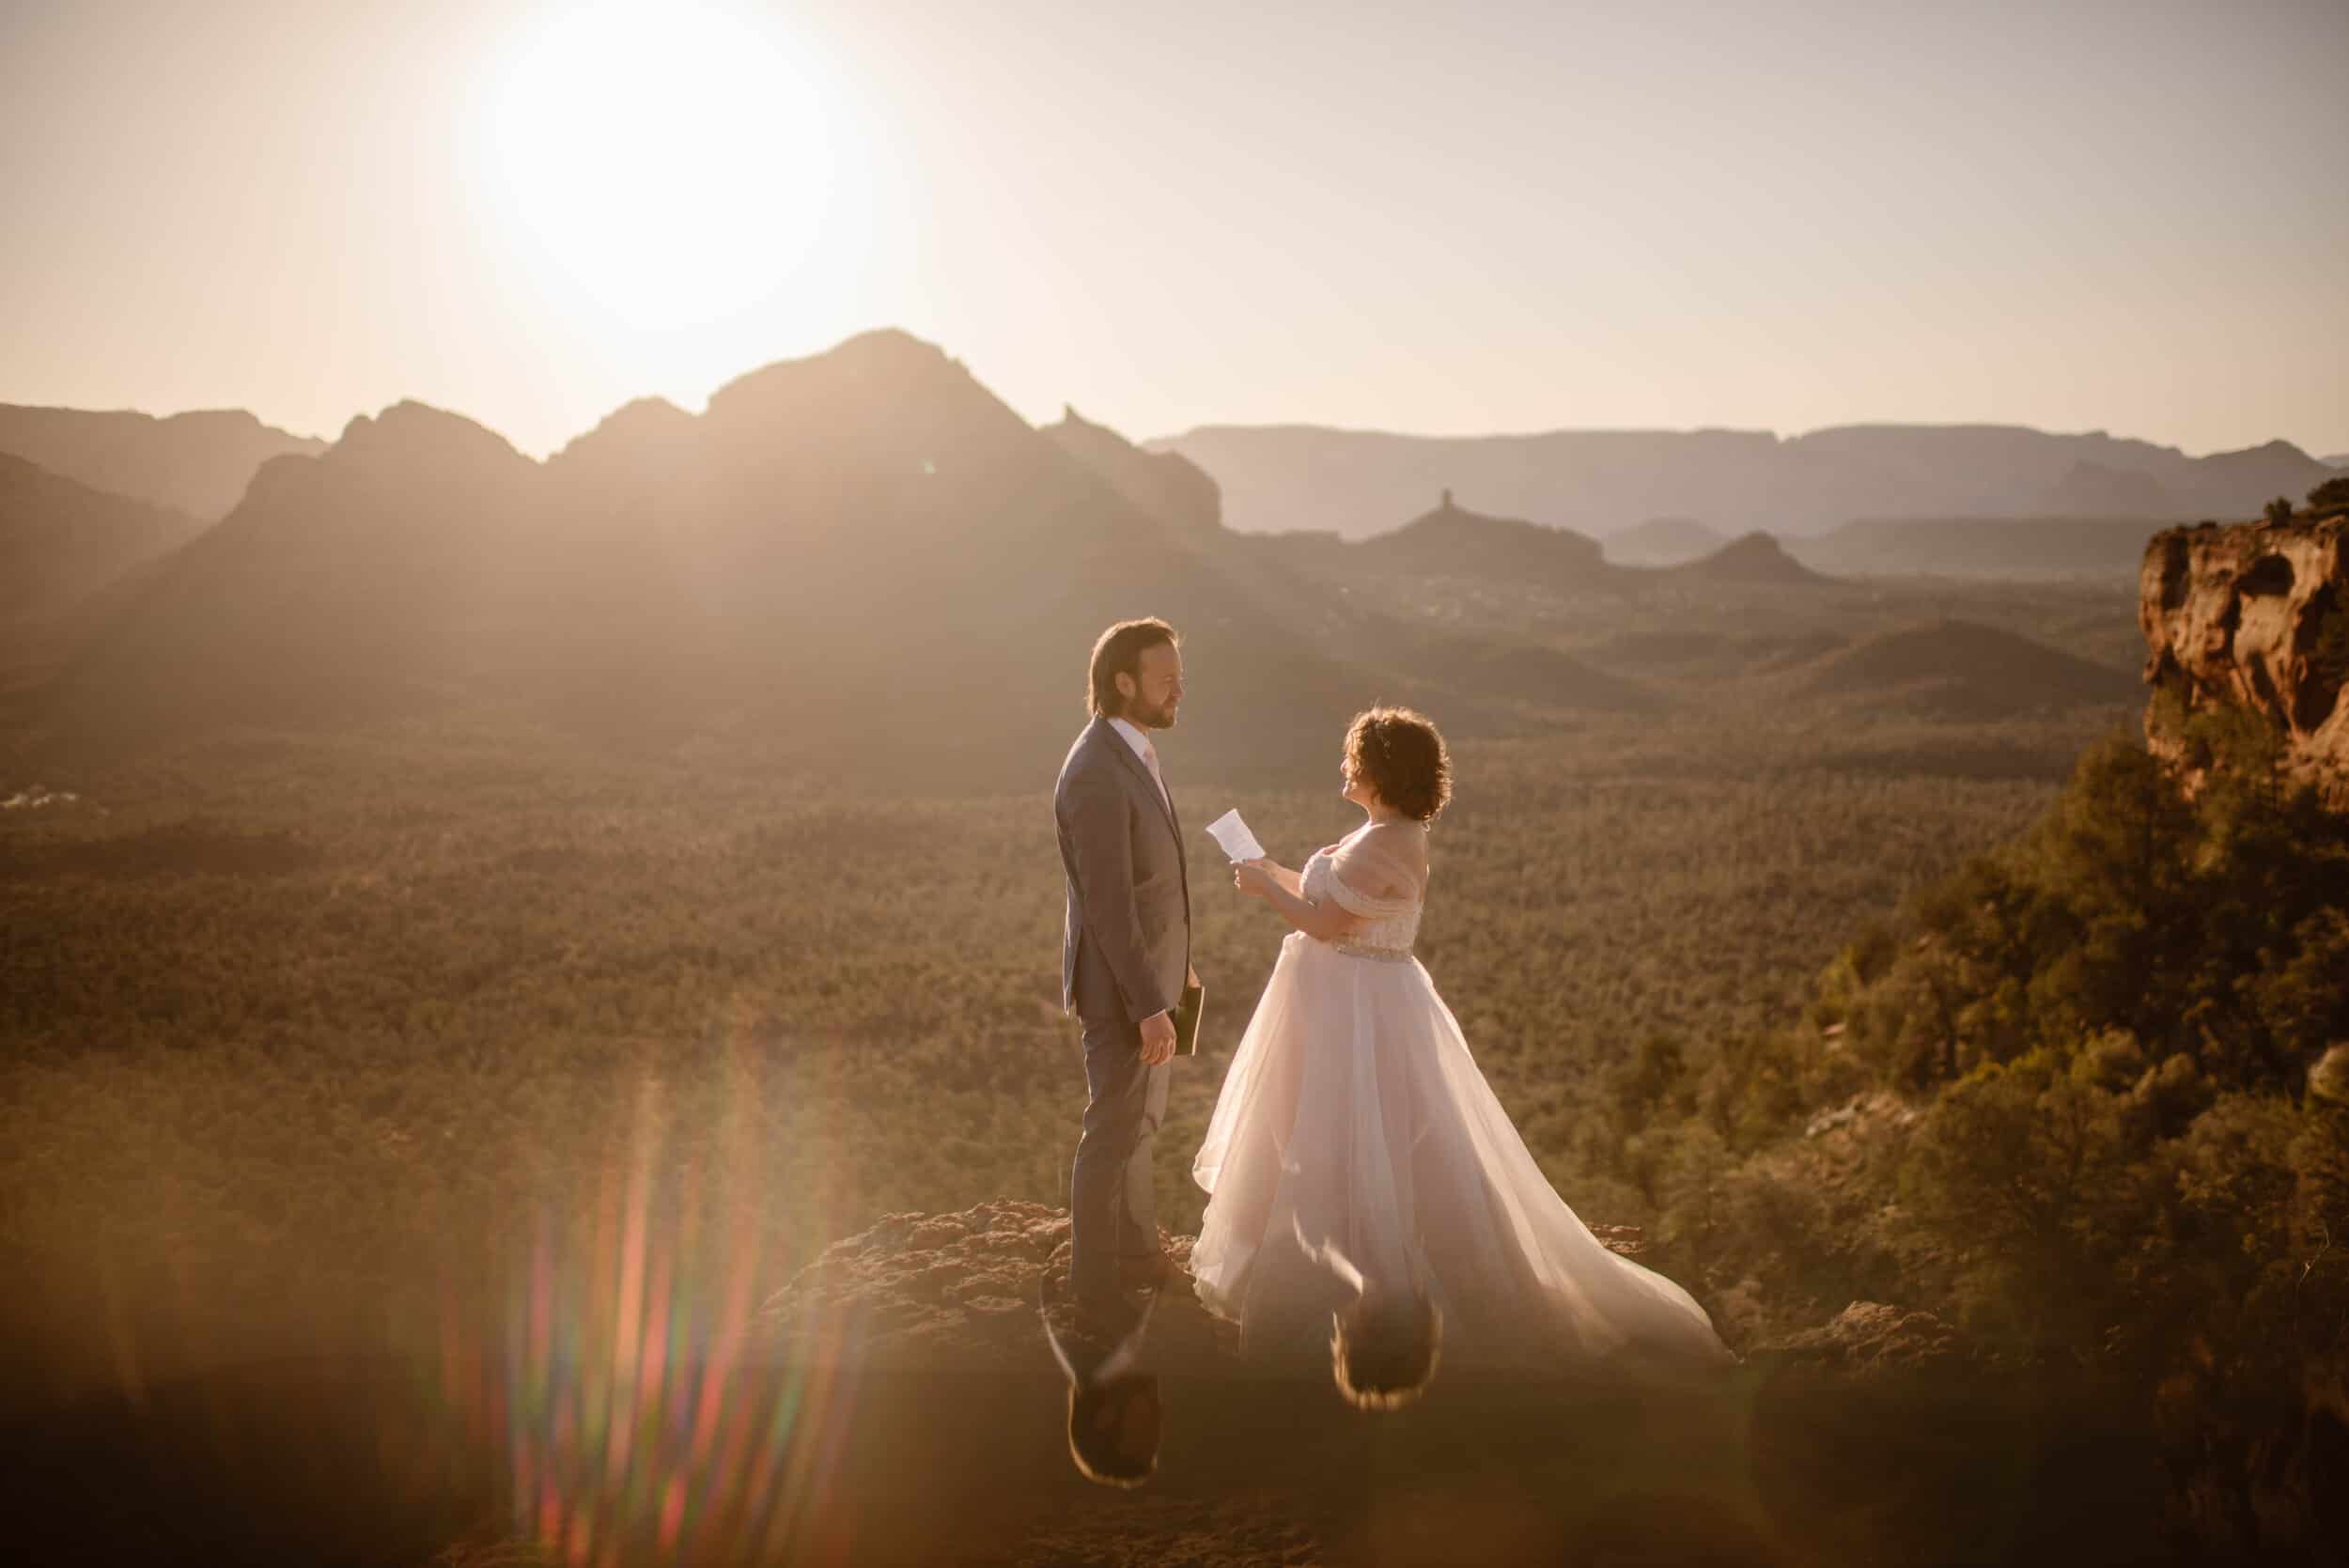 A pregnant bride and her groom share their private vows as the sun rises over Sedona.